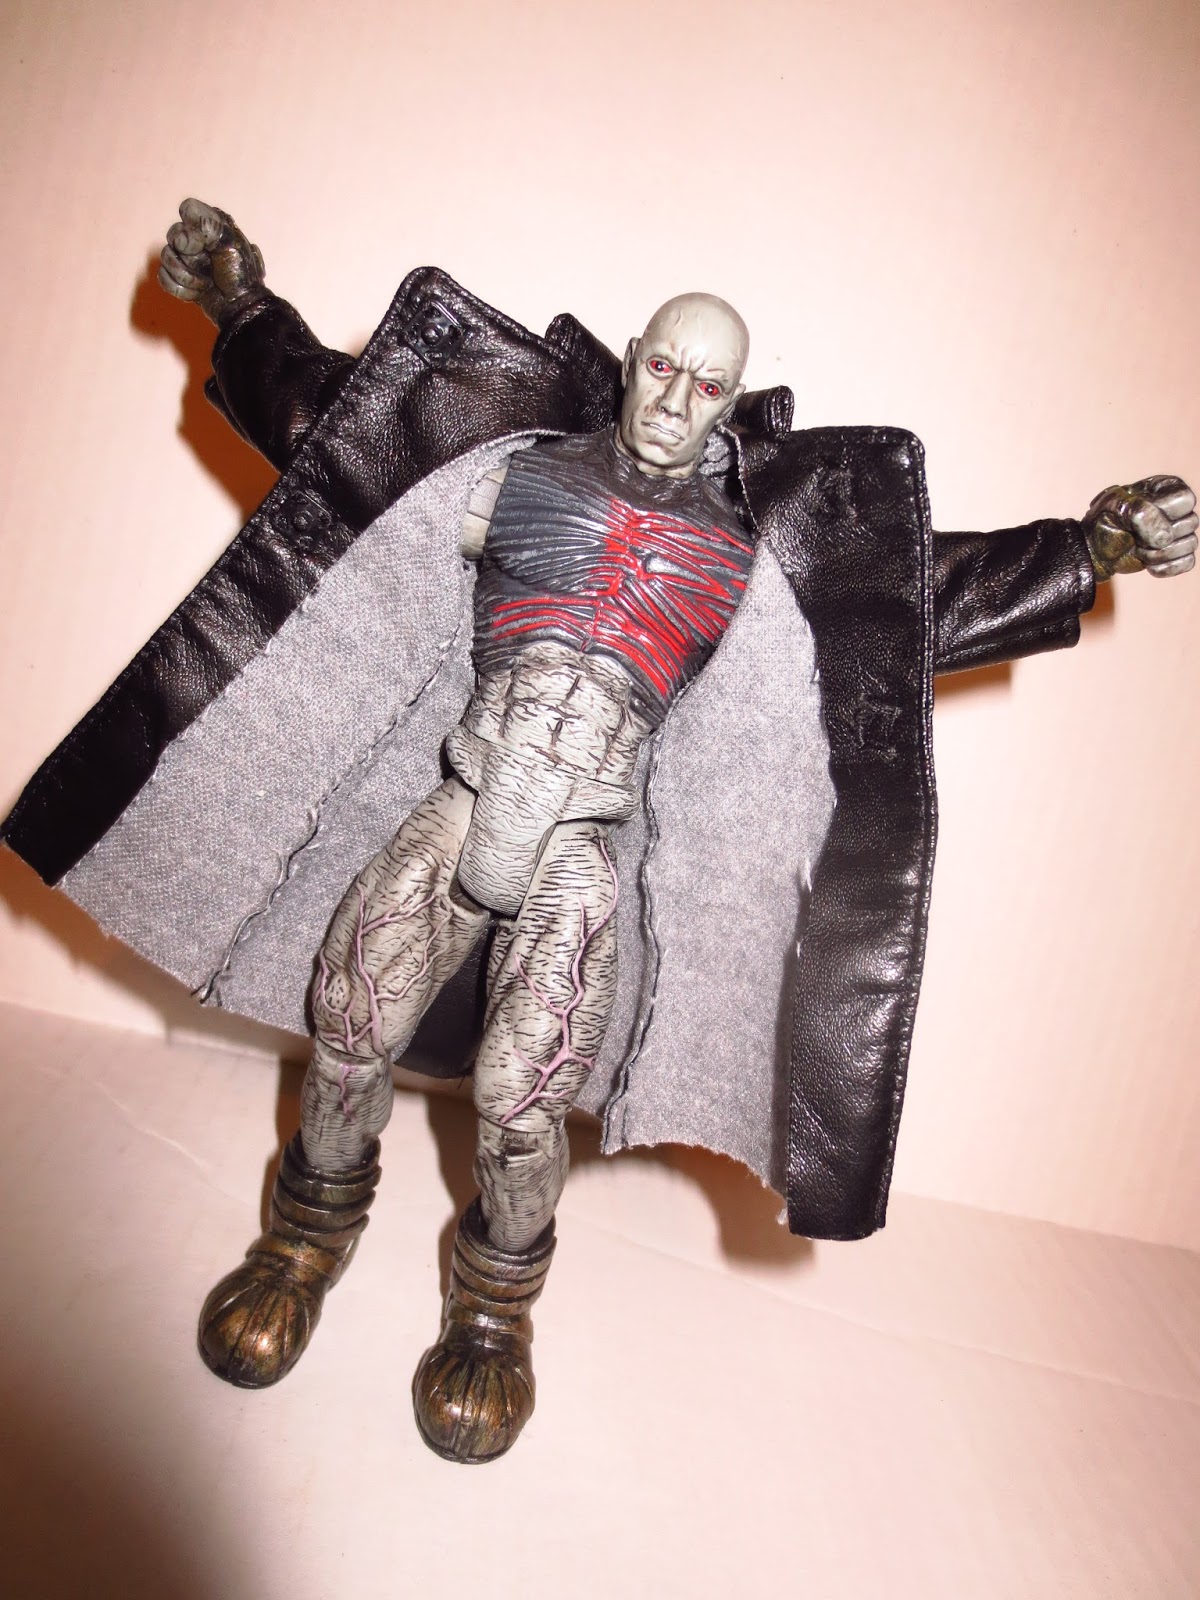 Action Figure Time Machine 90's Edition: Tyrant/ Mr. X from Resident Evil 2  Platinum by Toy Biz (Confirmed: Great)